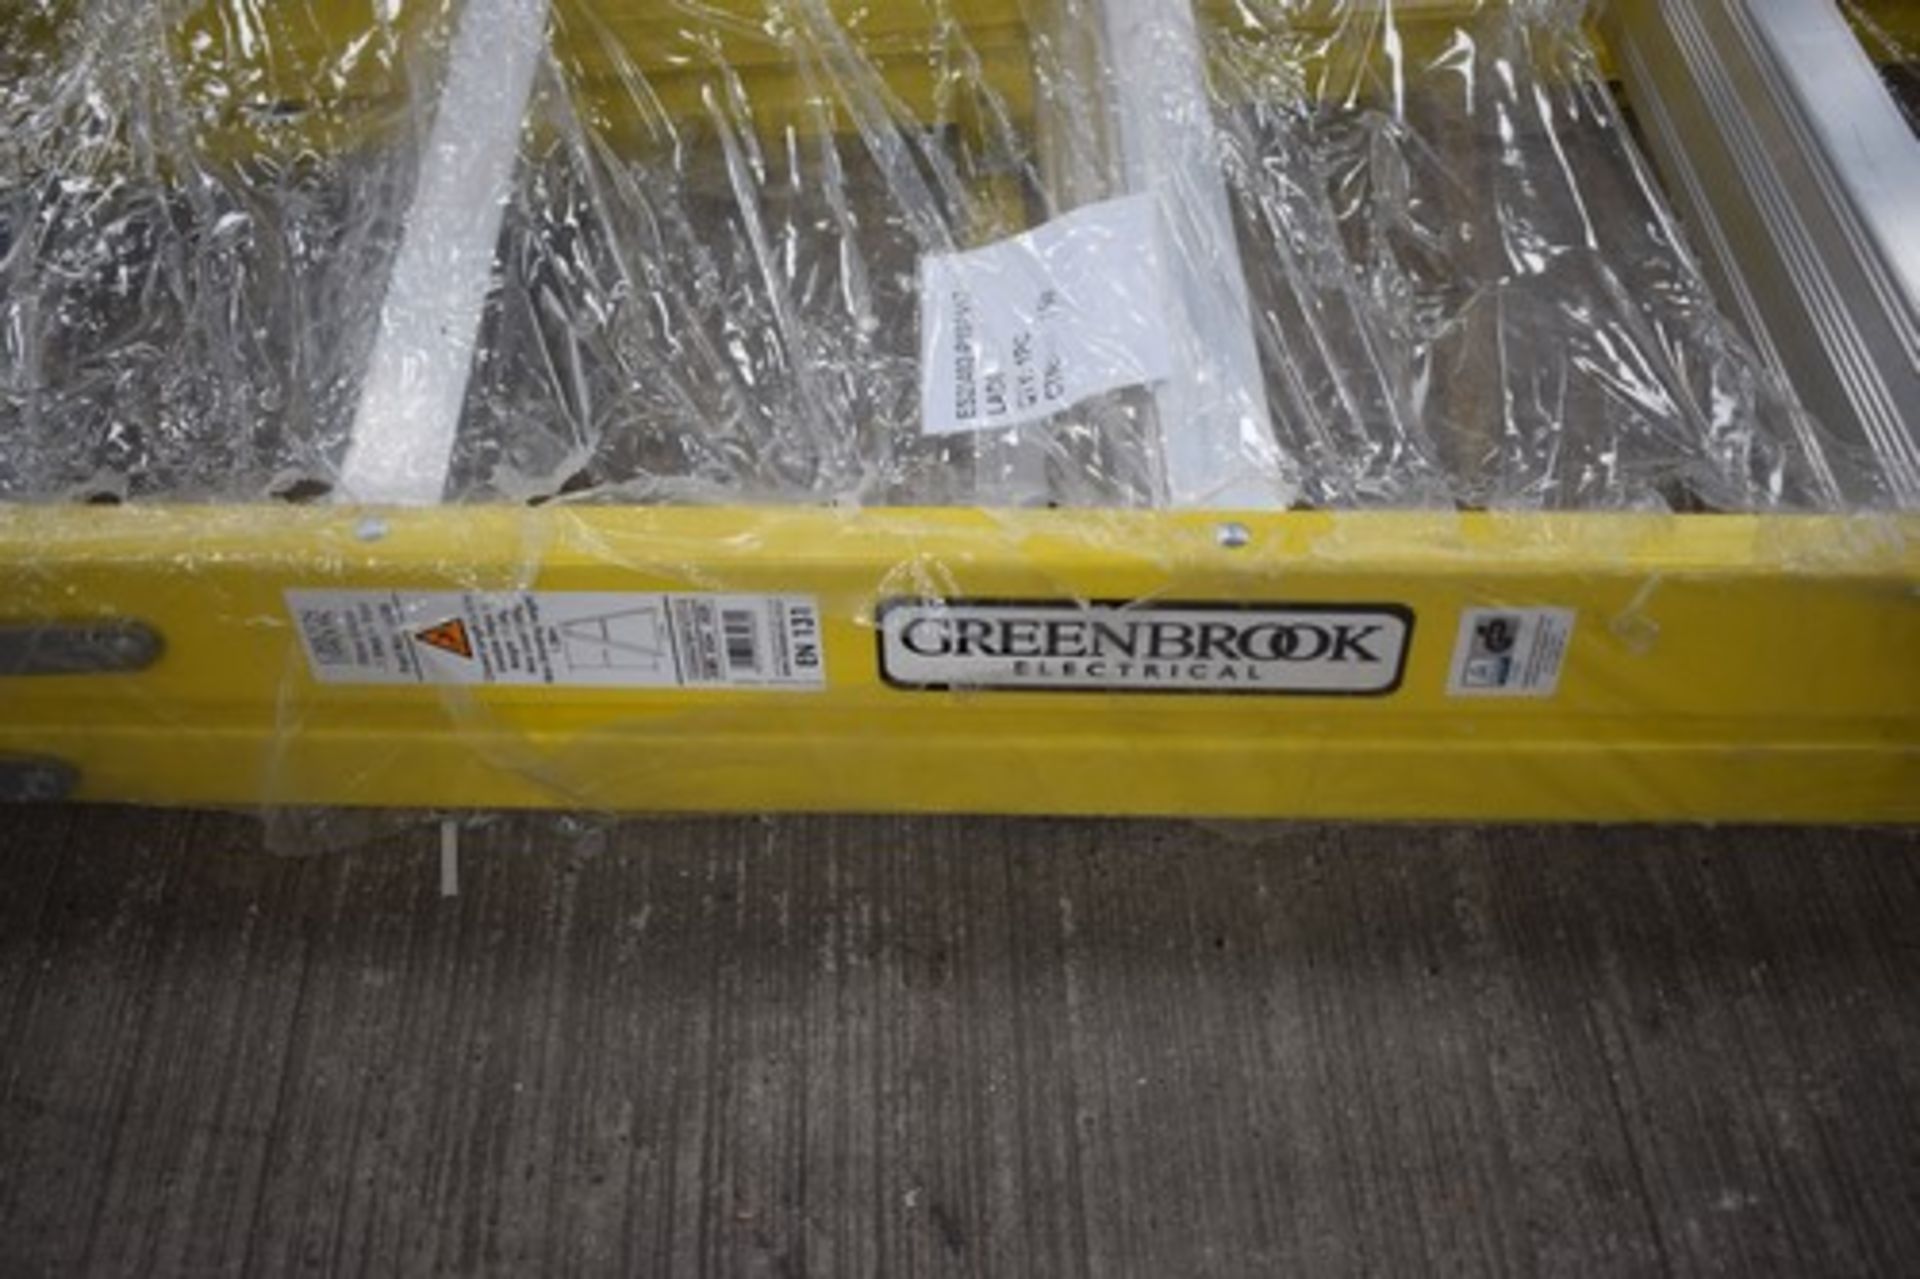 1 x Greenbrook electrical 7 step and tray, stepladder - new (open shed)